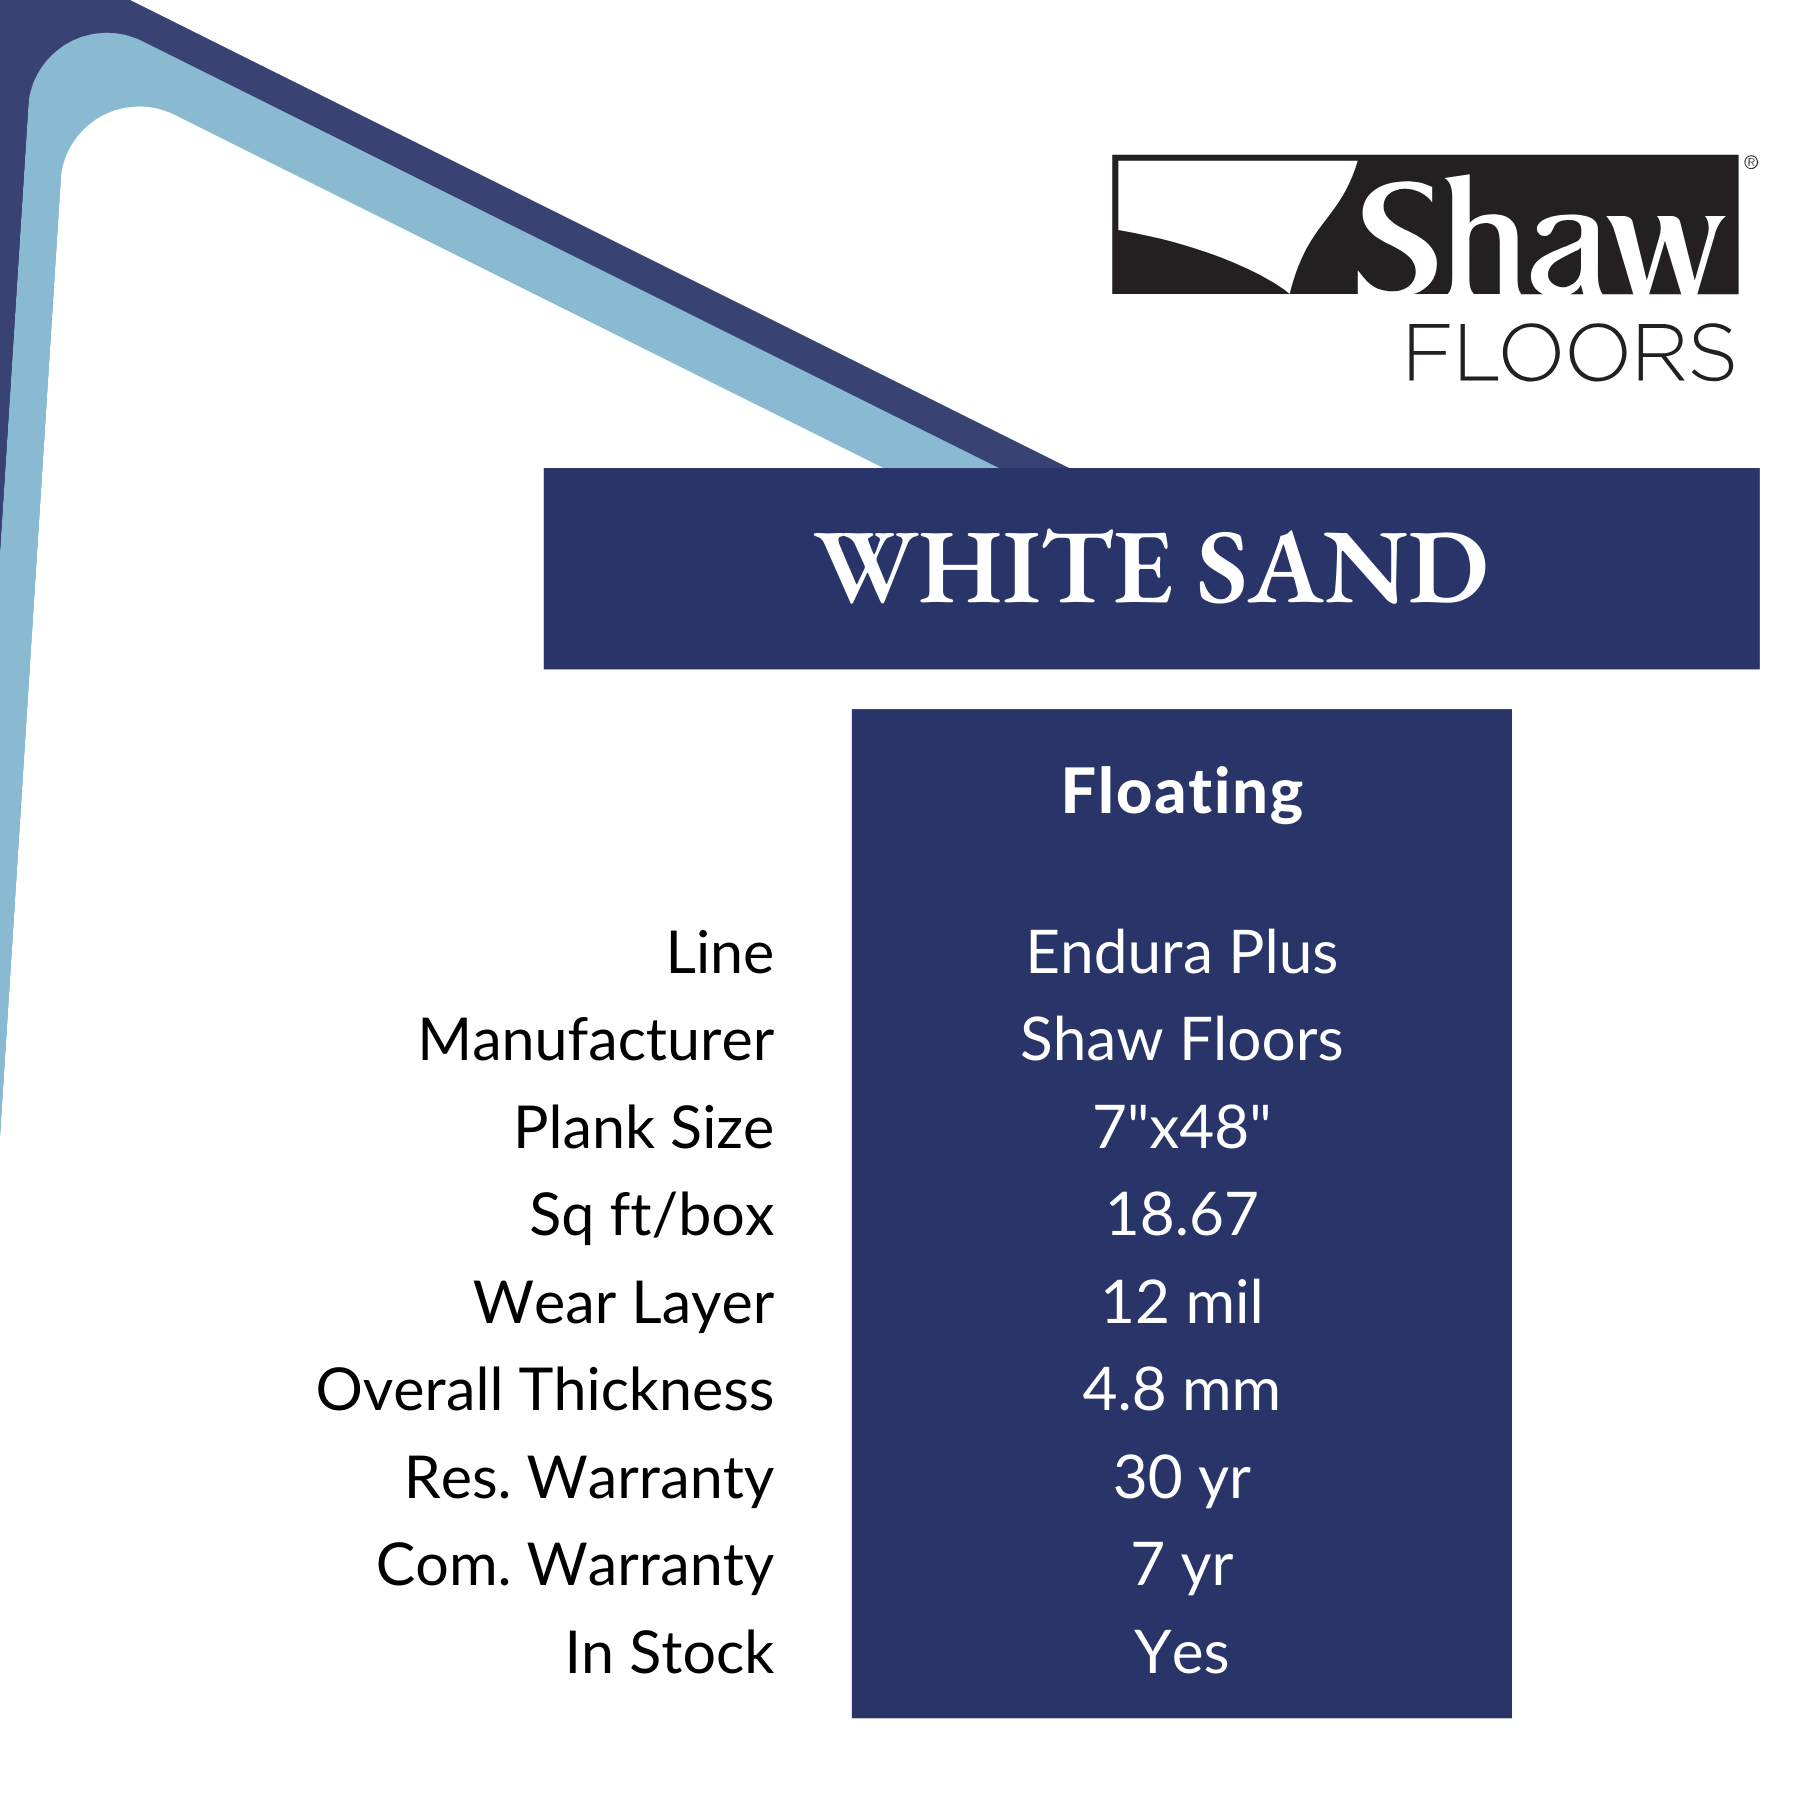 White Sand by Shaw sold at Calhoun's Flooring, Springfield, IL LVP Specs